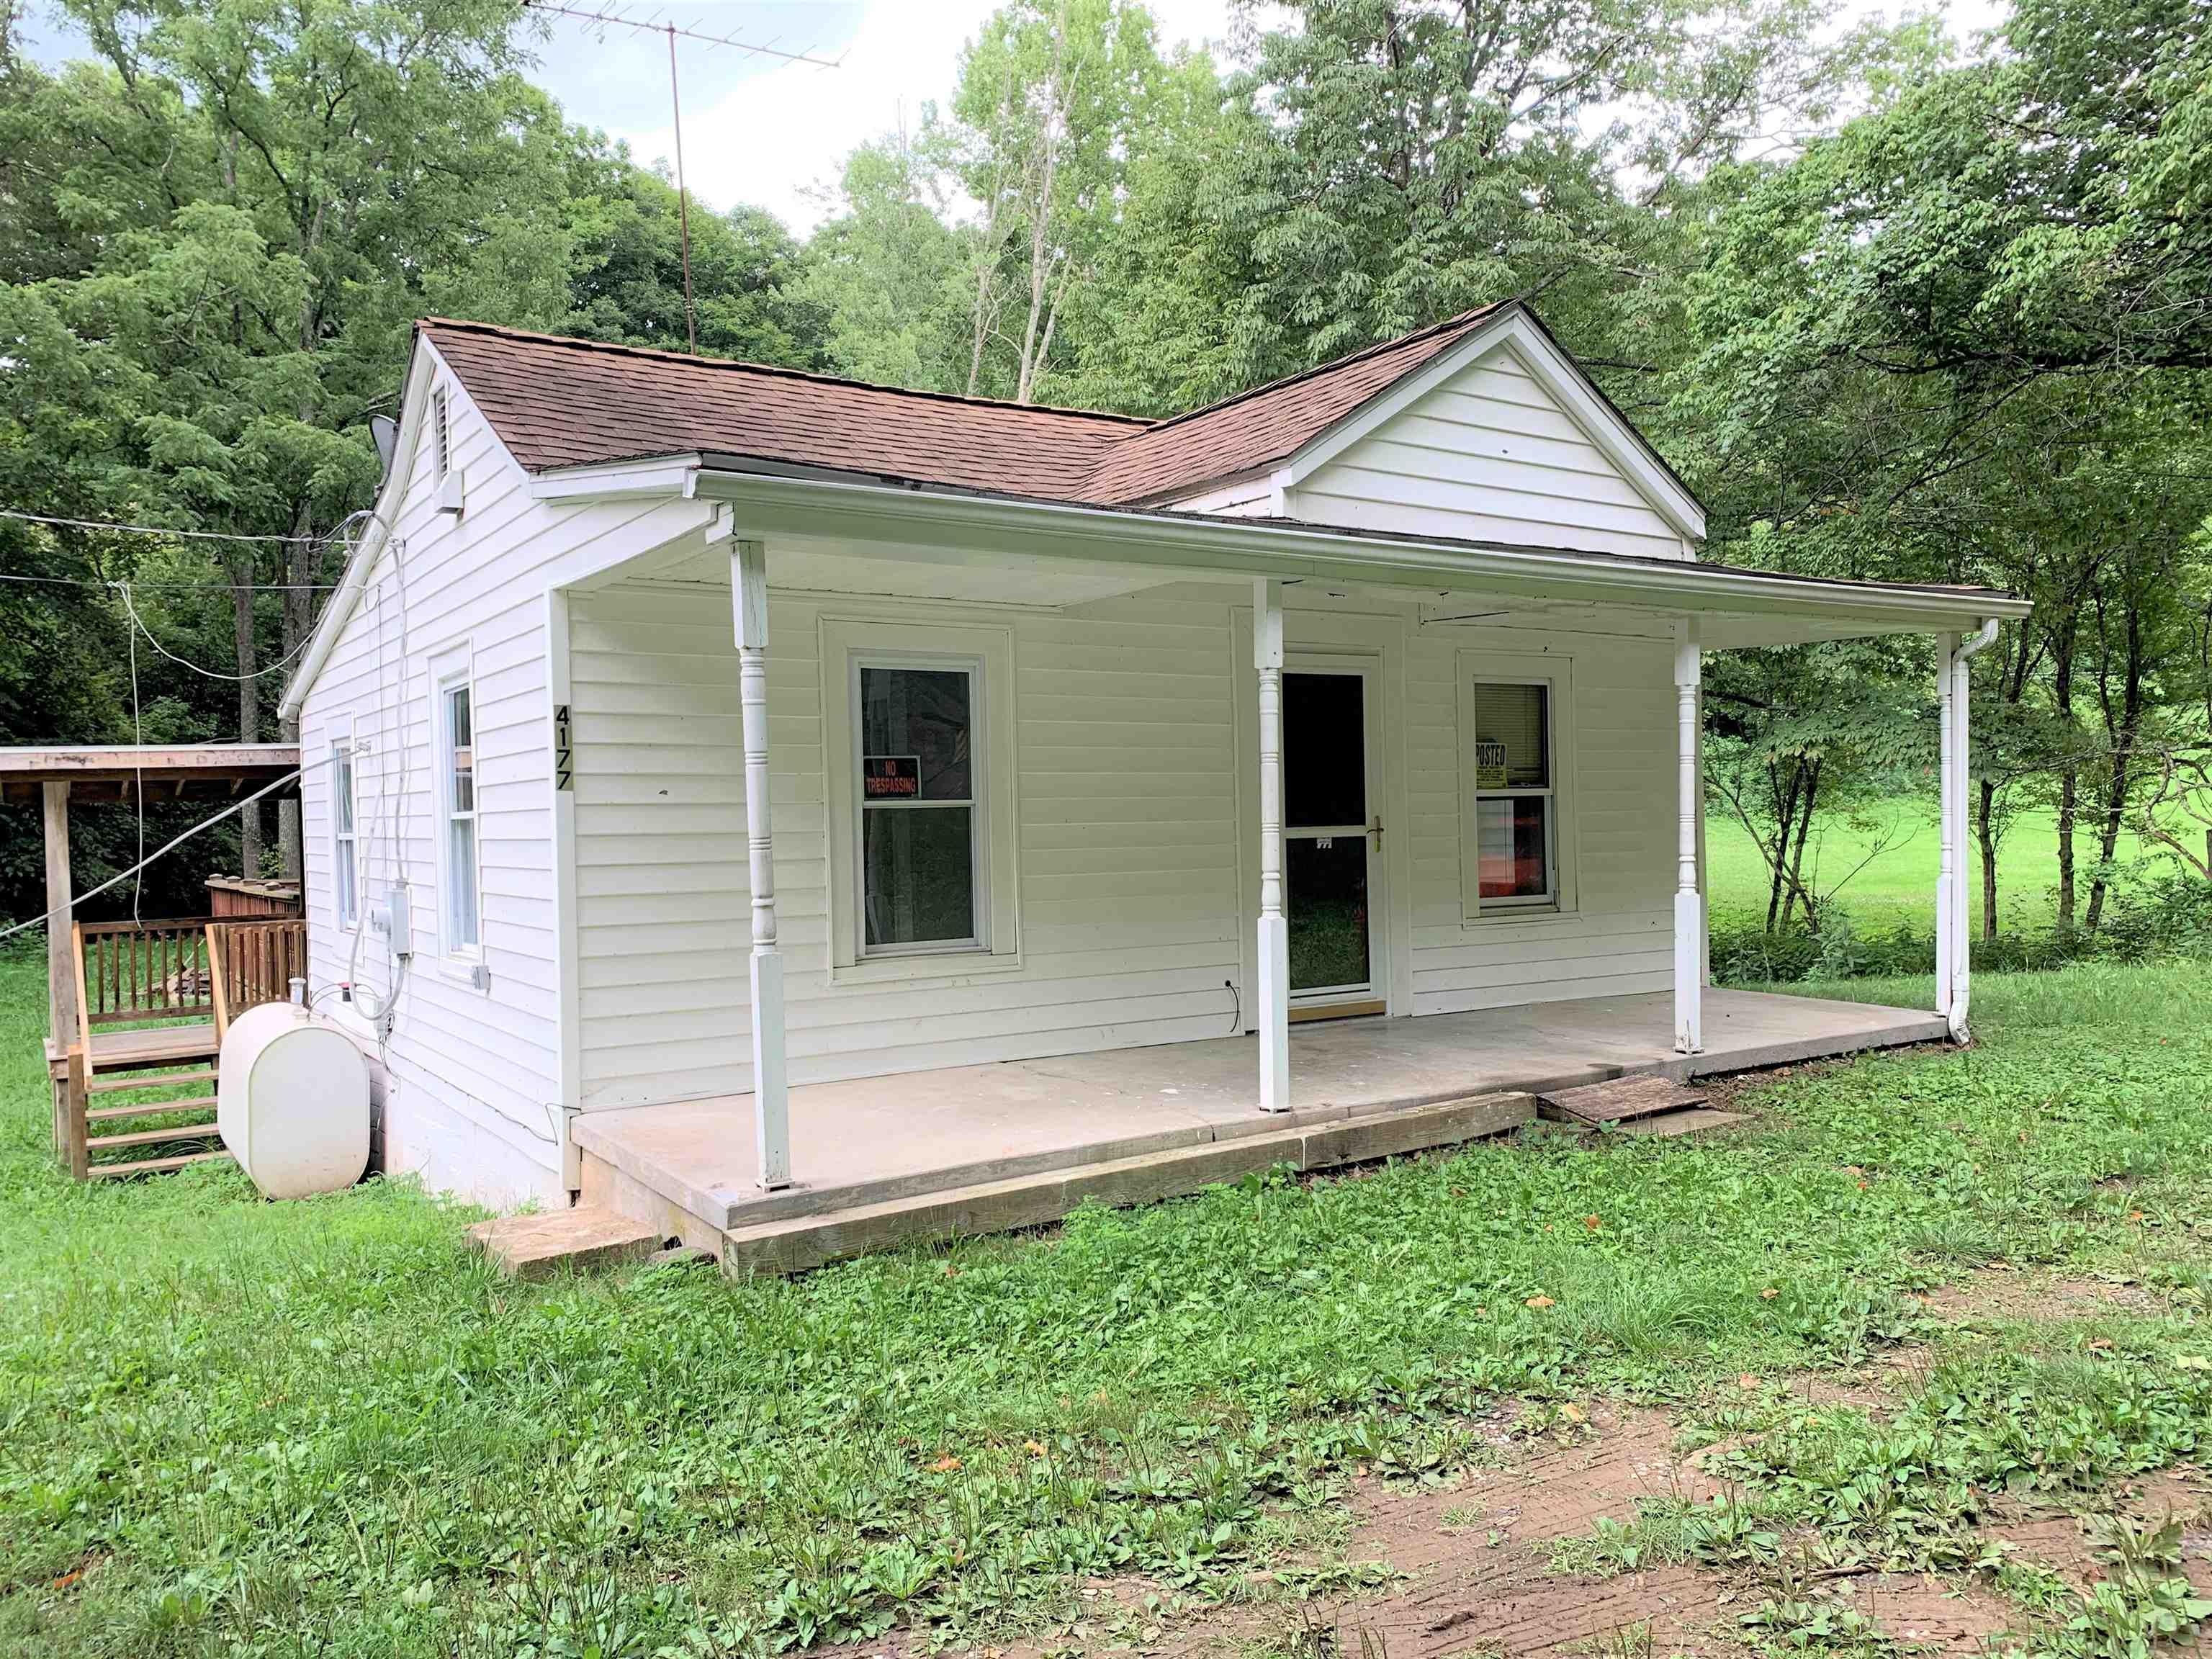 Great Get-a-way! Ranch on approx 0.57 acres Relax on the huge back deck with beautiful creek frontage. Level yard. Insulated windows. Well approx 5+/- yrs old. Roof & oil furnace approx 8+/- yrs old. Covered front & back porches. Large storage building